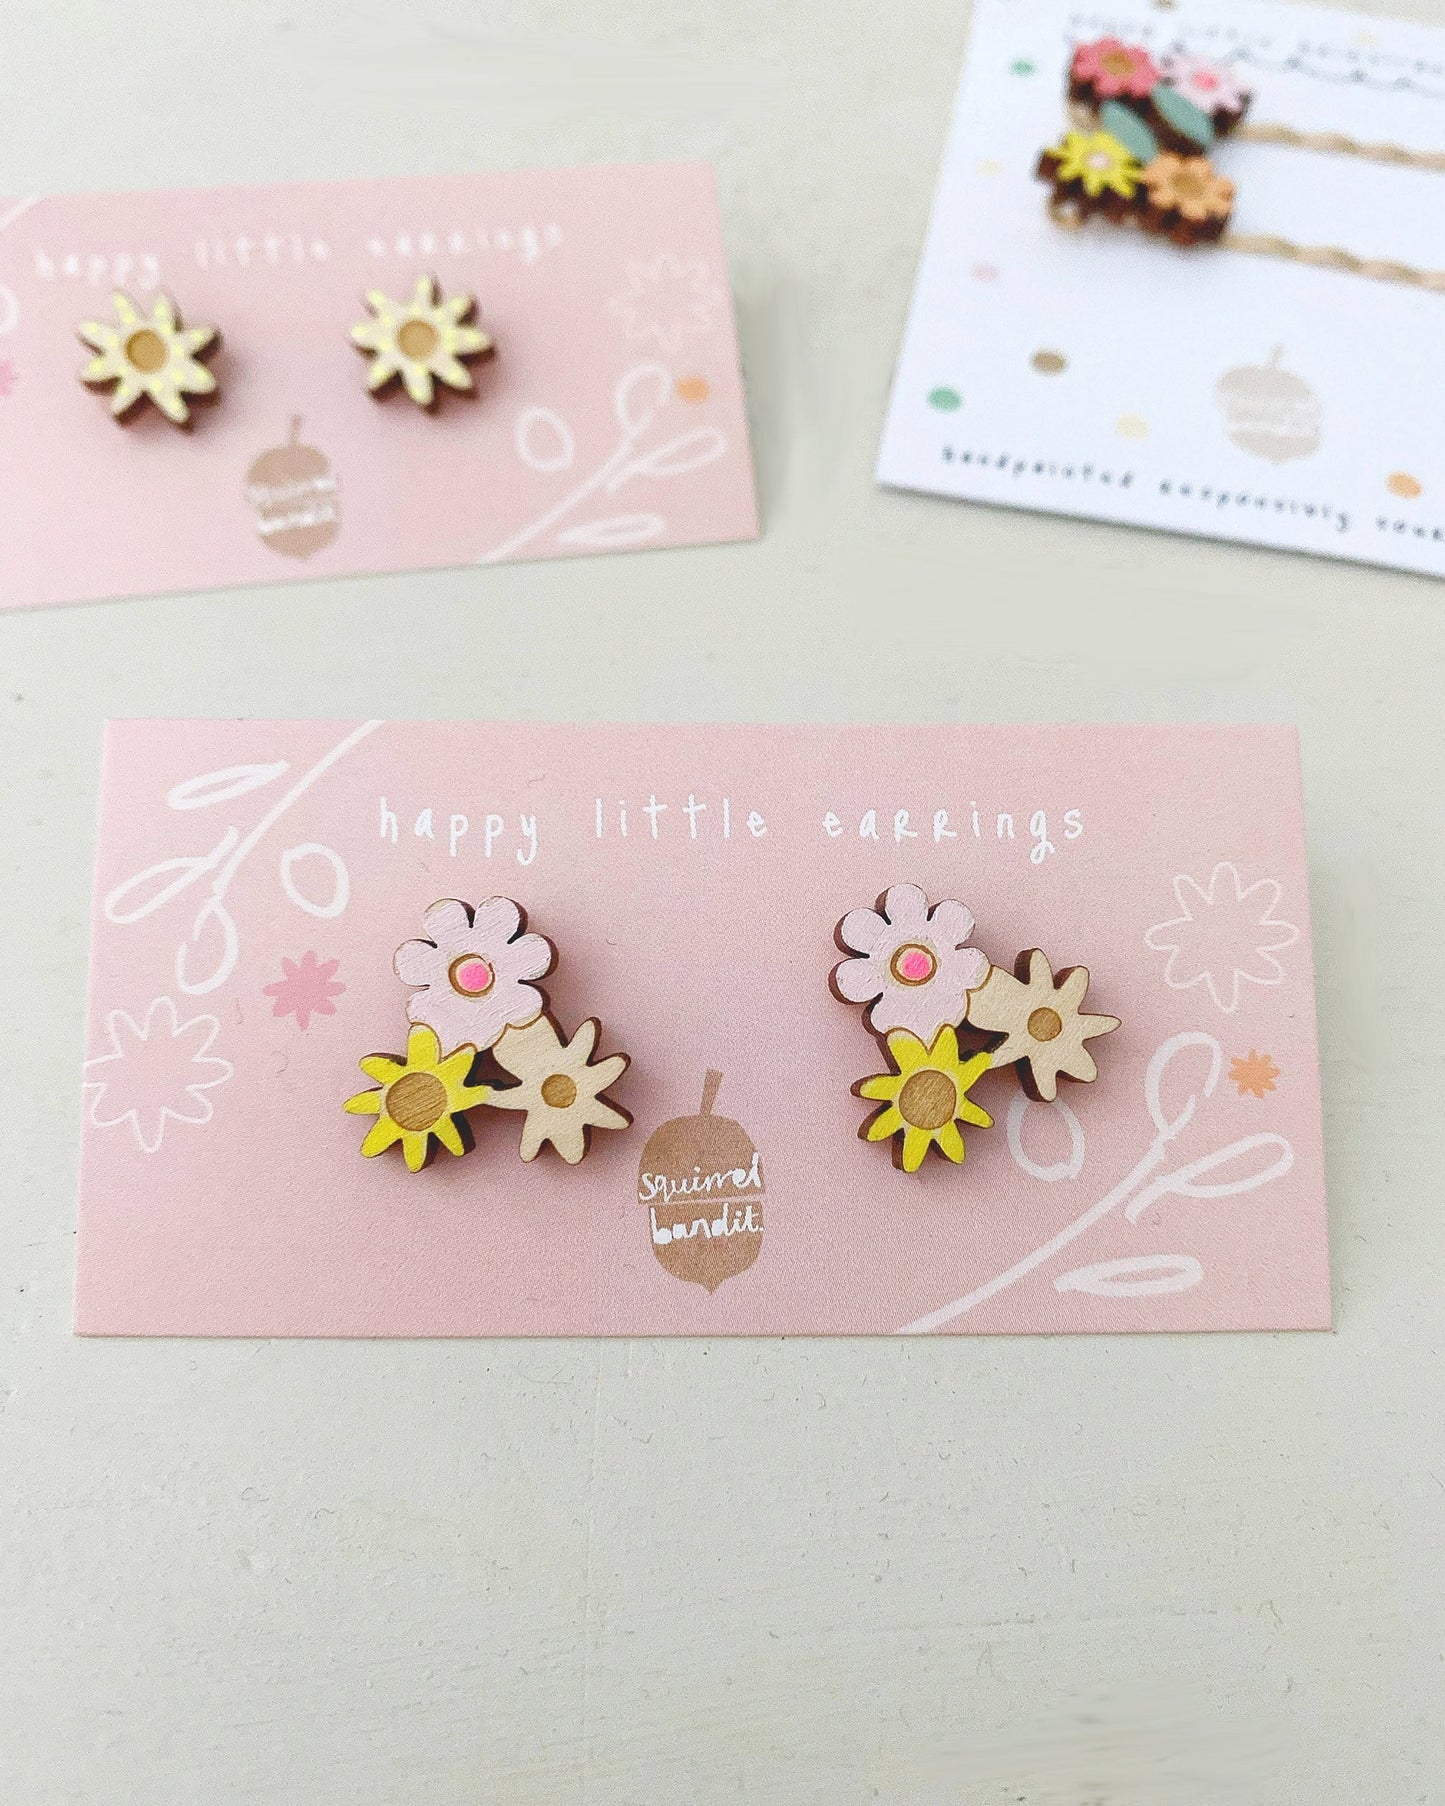 Hand-painted floral wooden earrings